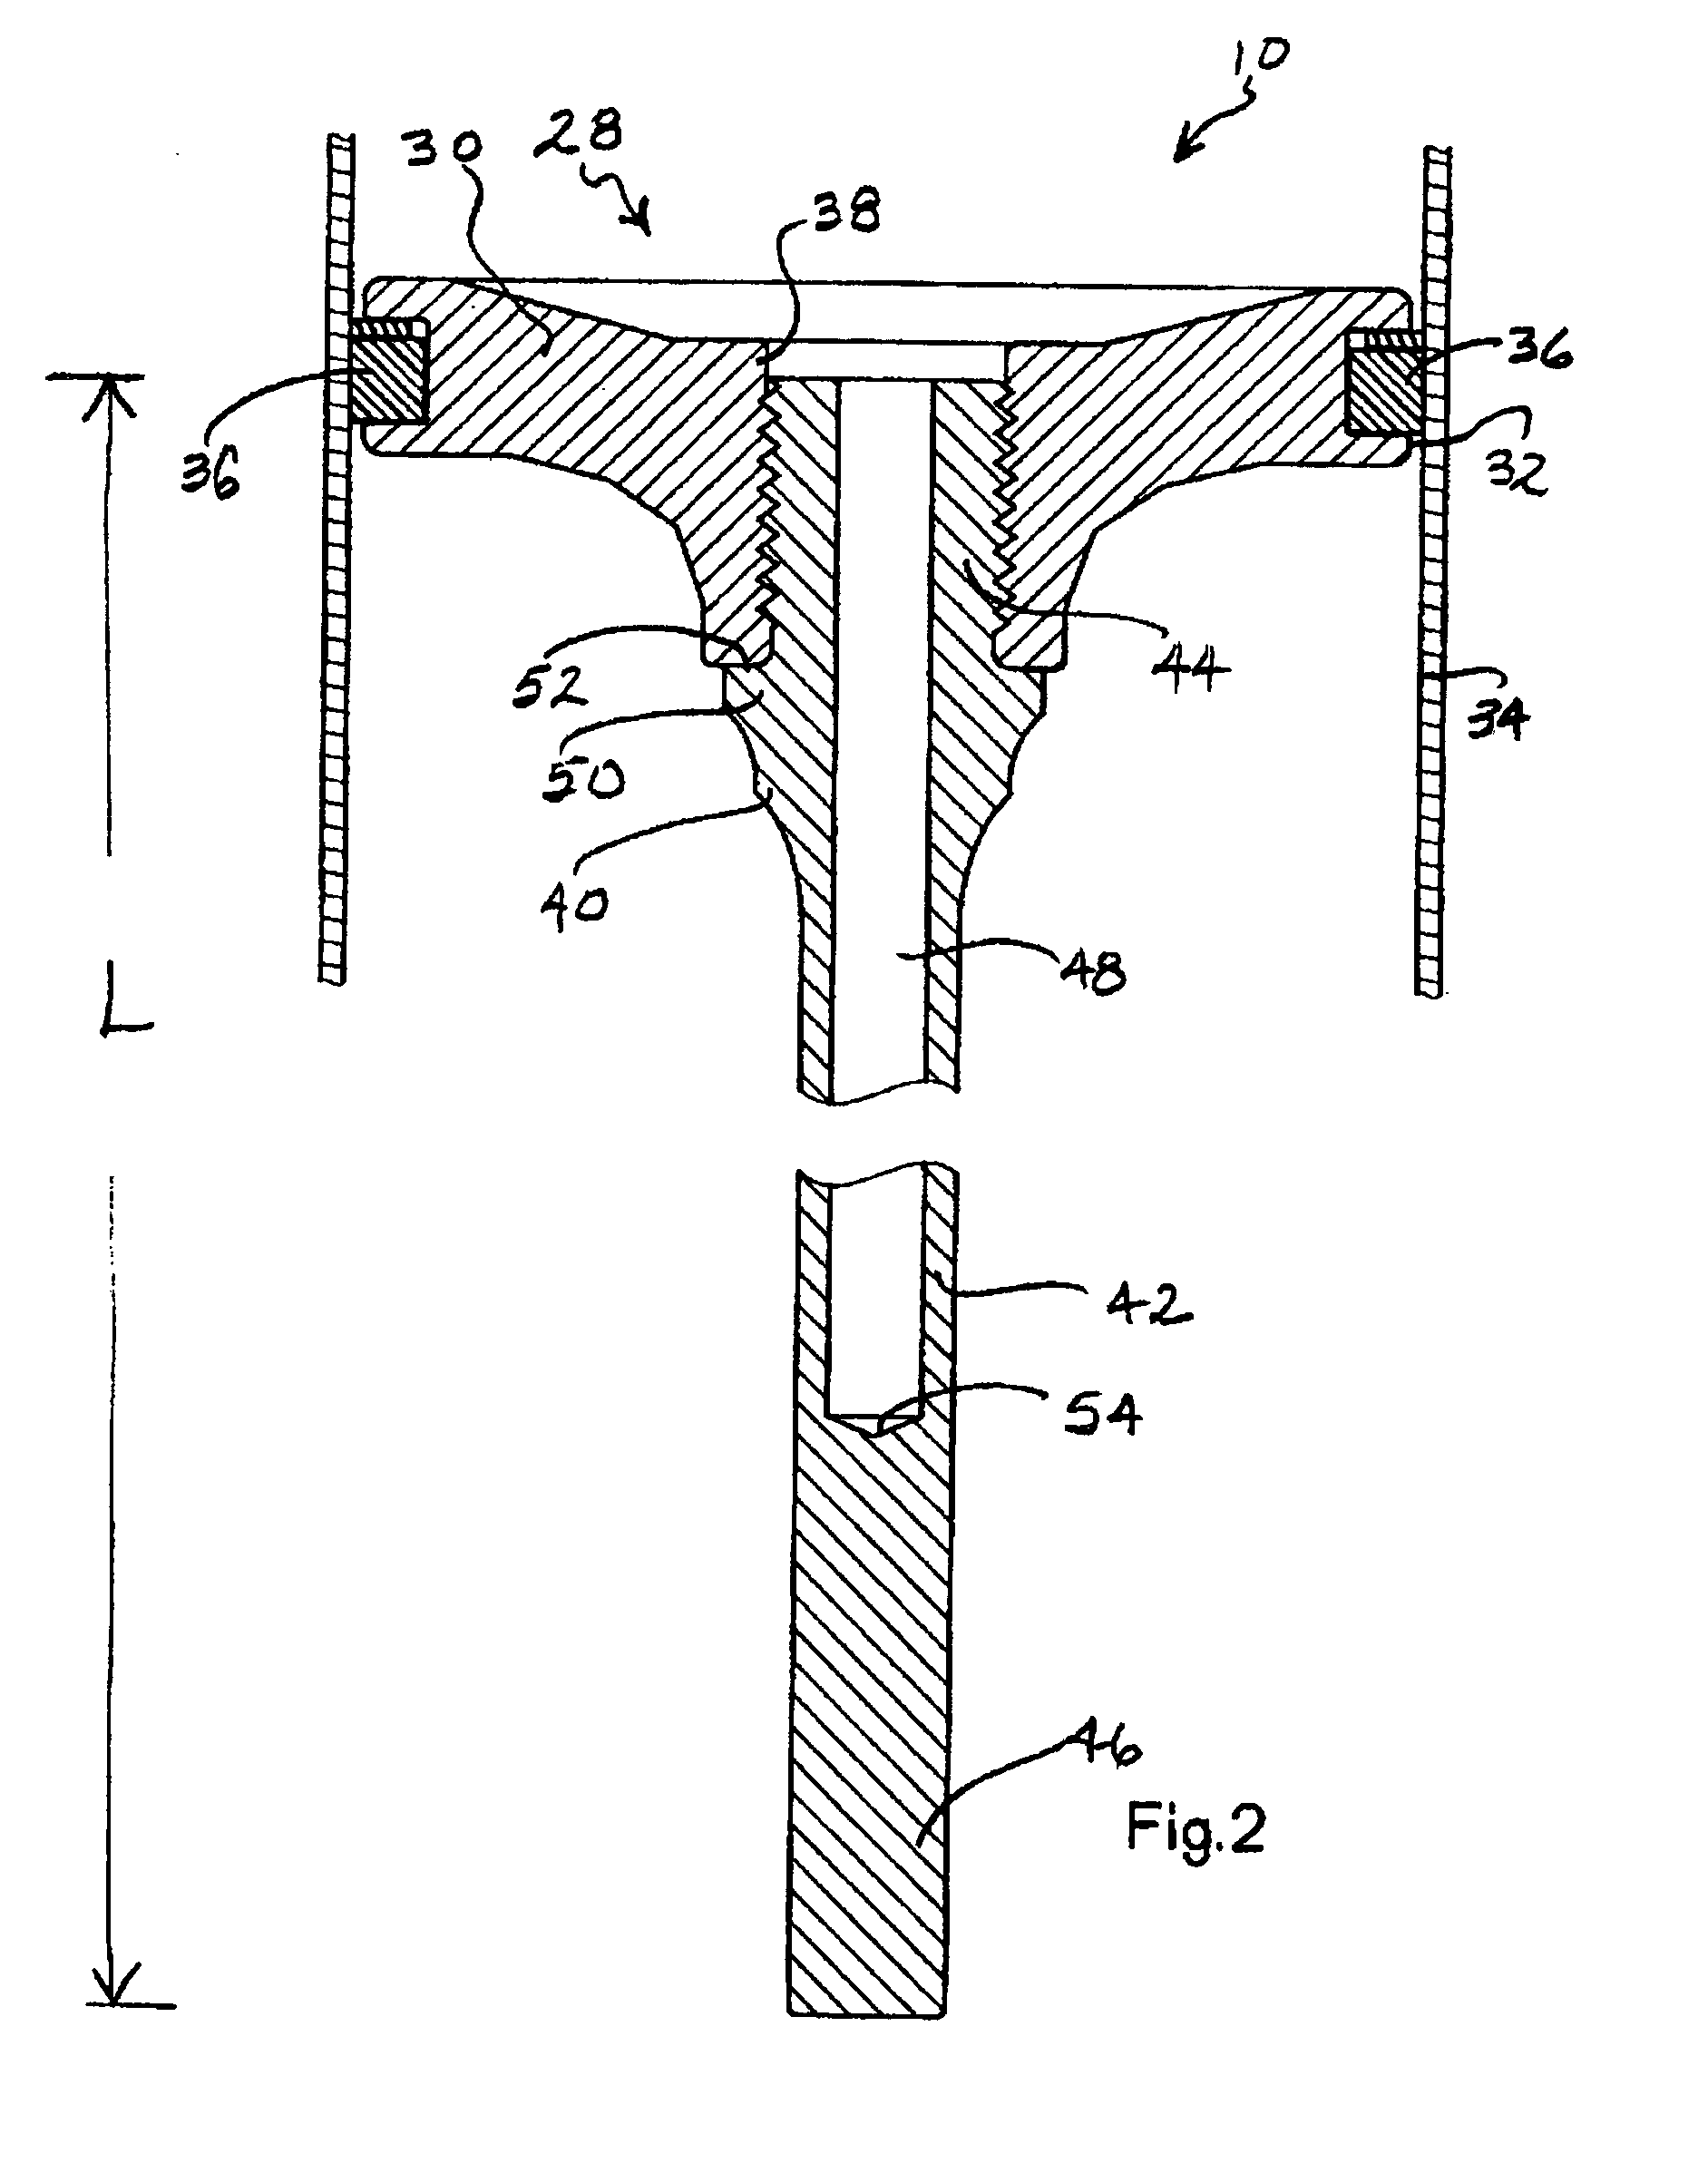 Driver blade with auxiliary combustion chamber for combustion powered fastener-driving tool